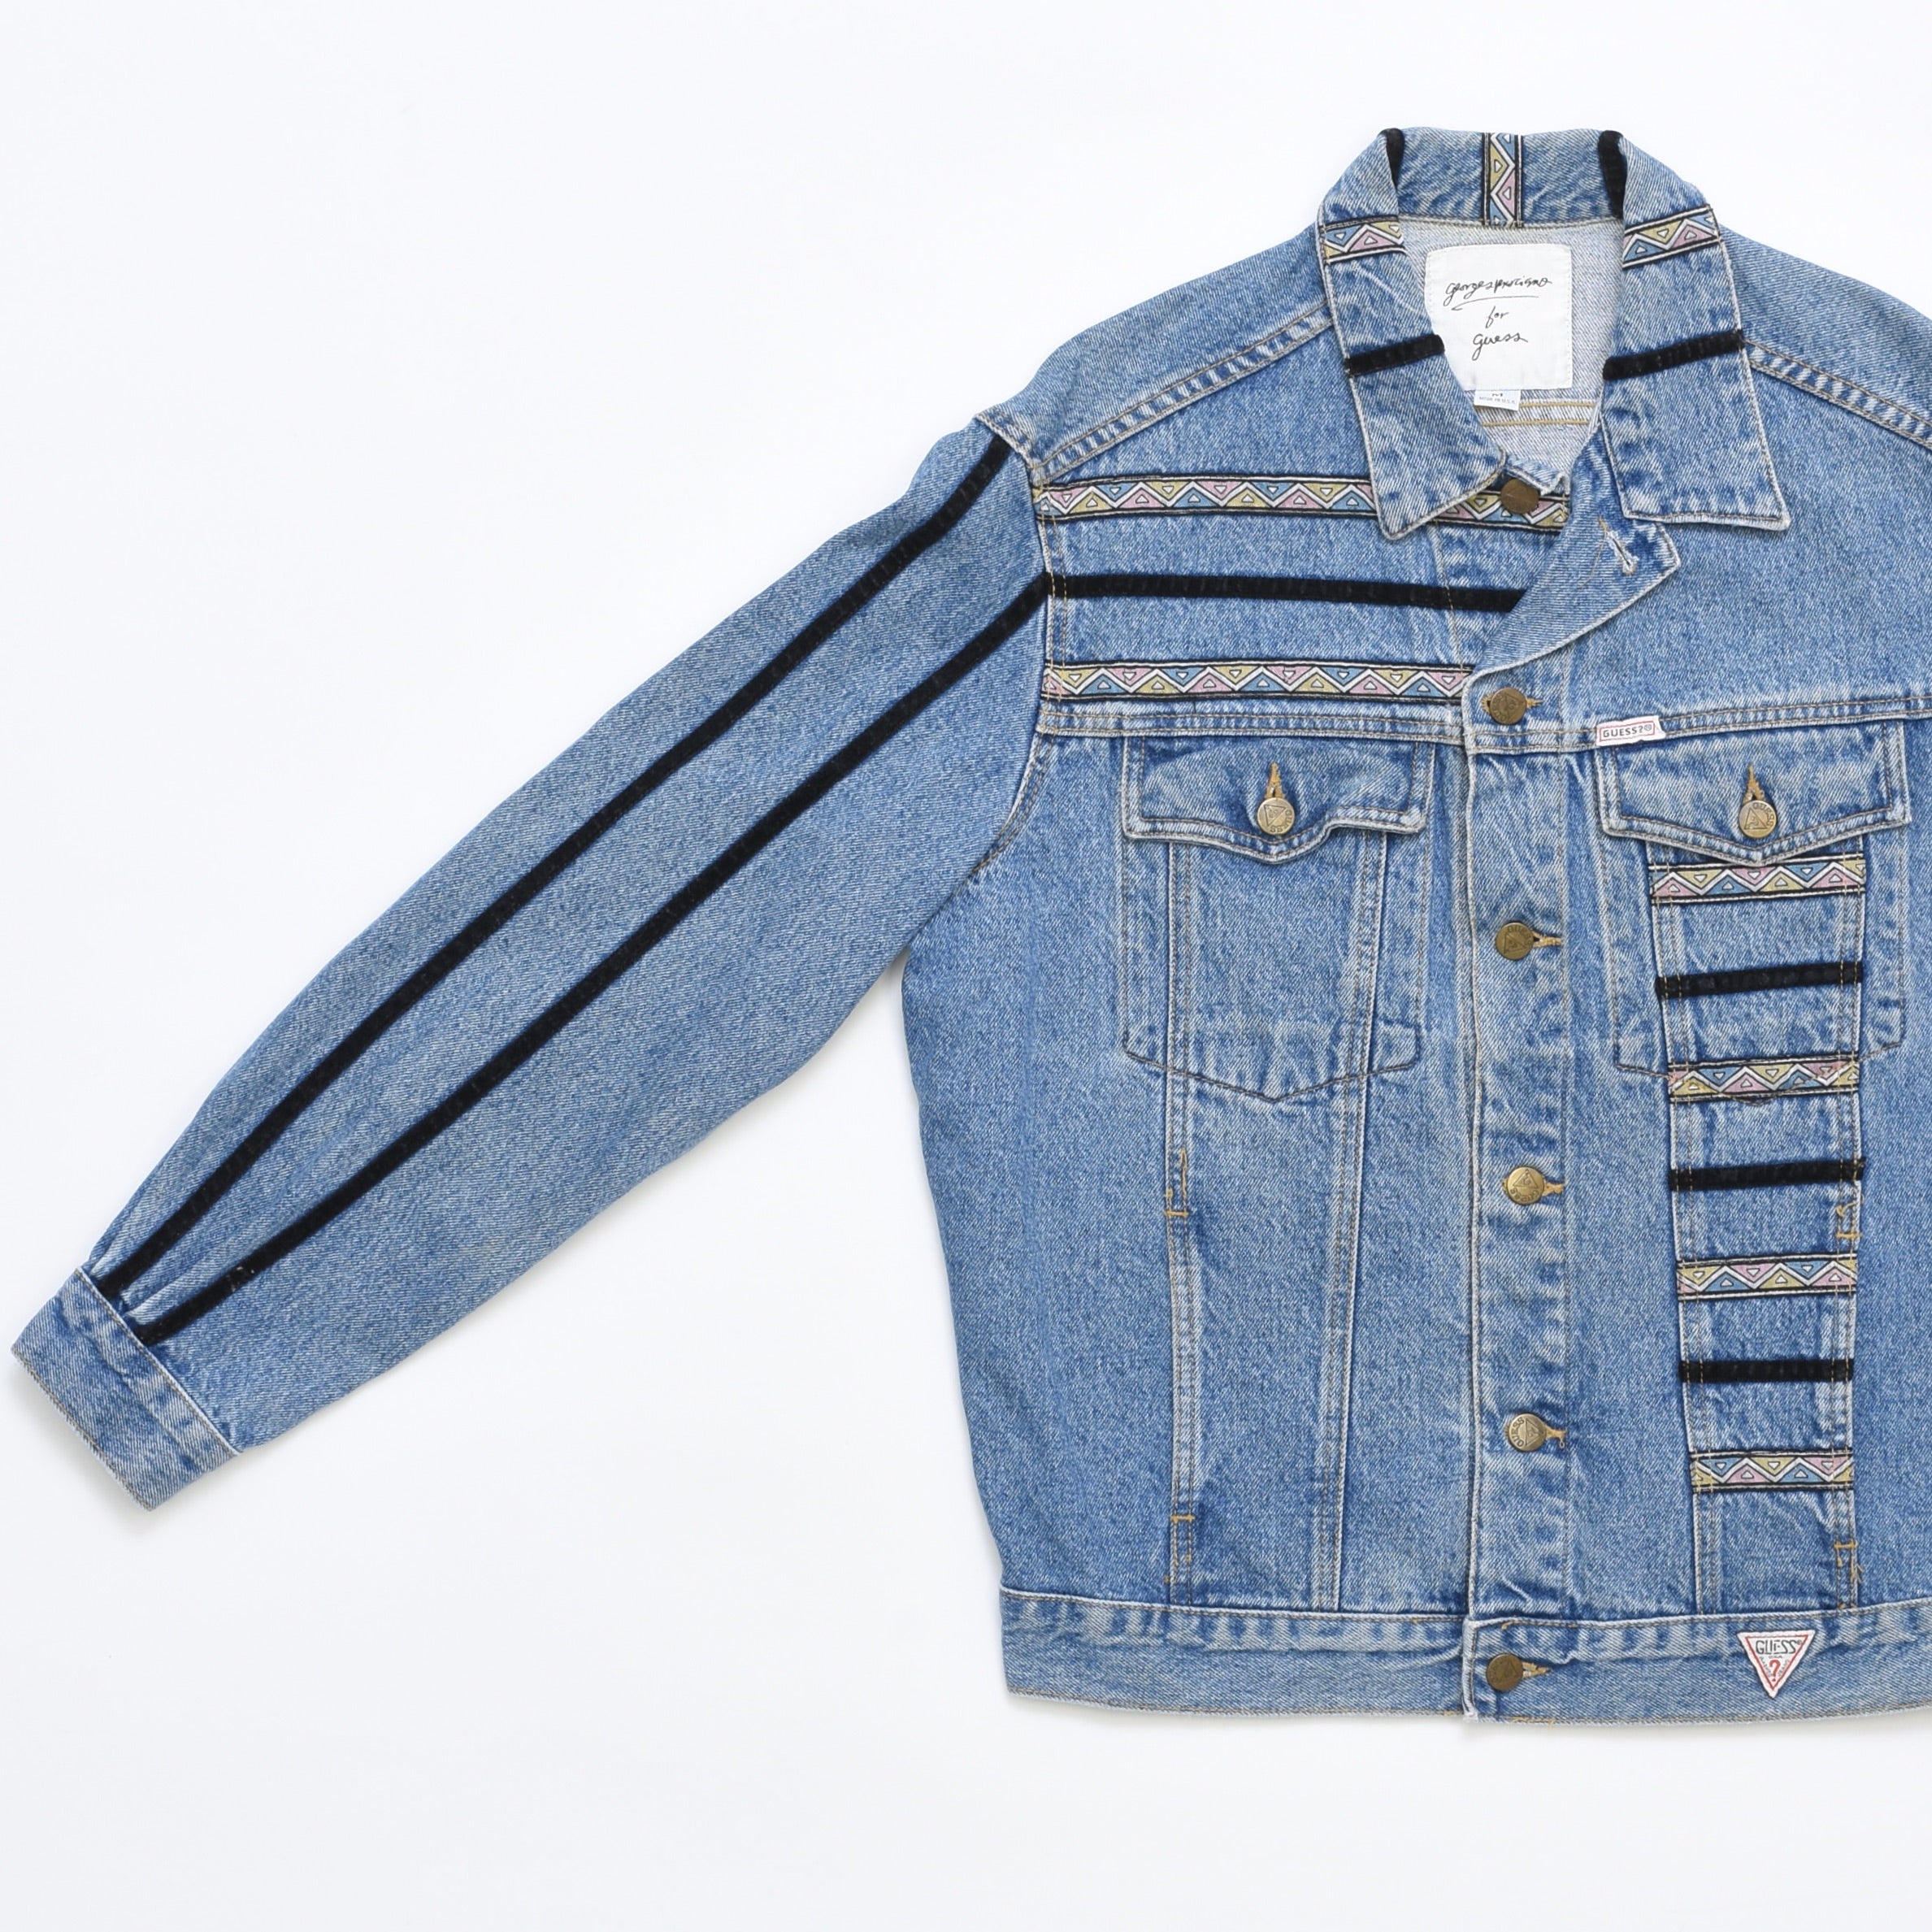 HdN Guess Classic Denim Jacket, Vintage Select